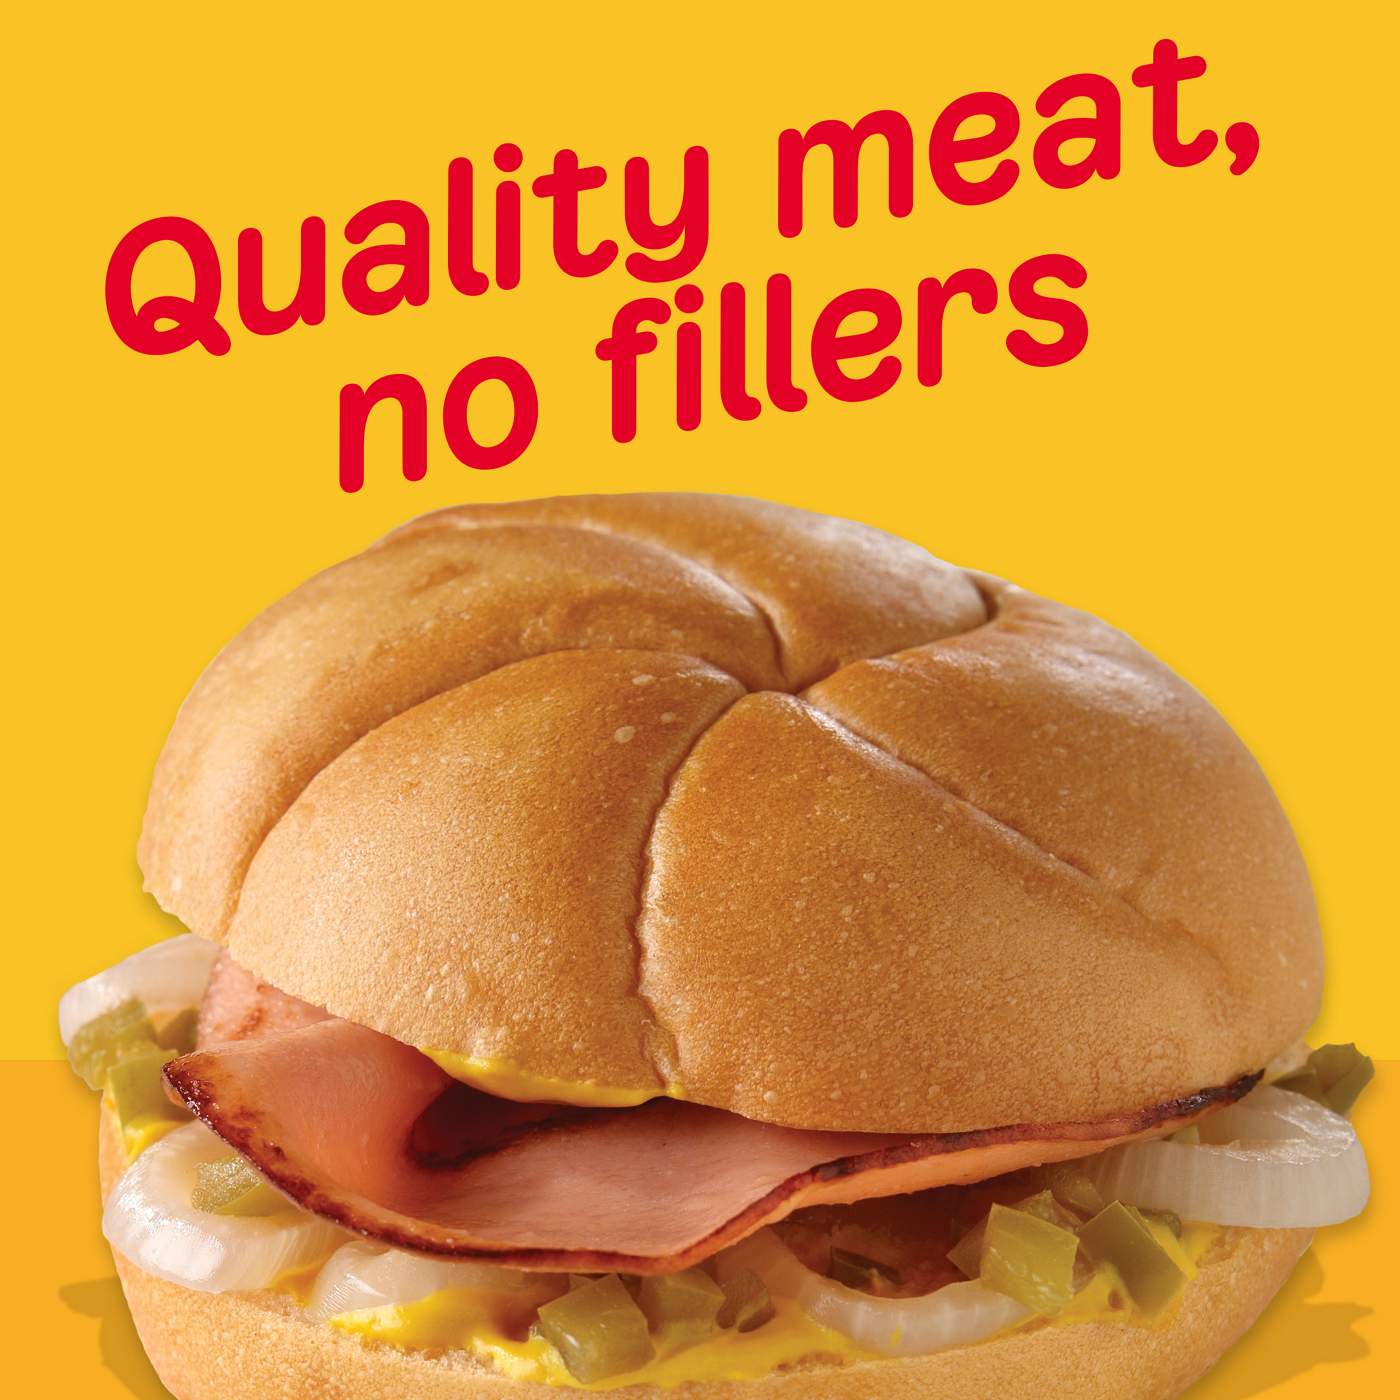 Oscar Mayer Bologna Sliced Lunch Meat, Super Thick Cut; image 2 of 4